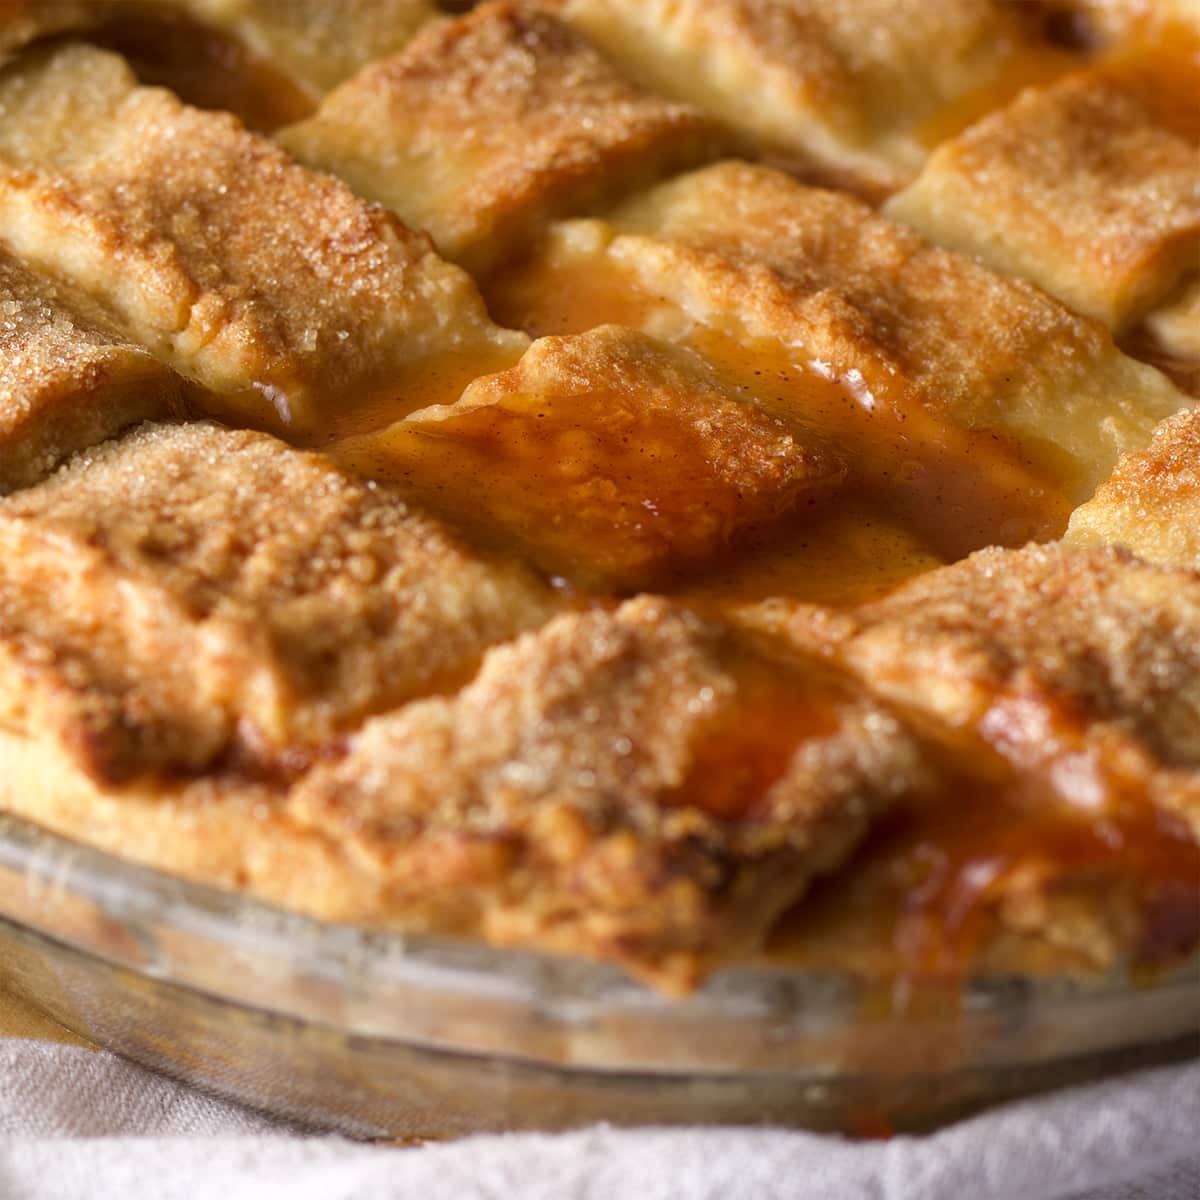 A close up photo of a freshly baked peach pie so you can see the peach pie filling bubbling up in between the gaps in the lattice crust.